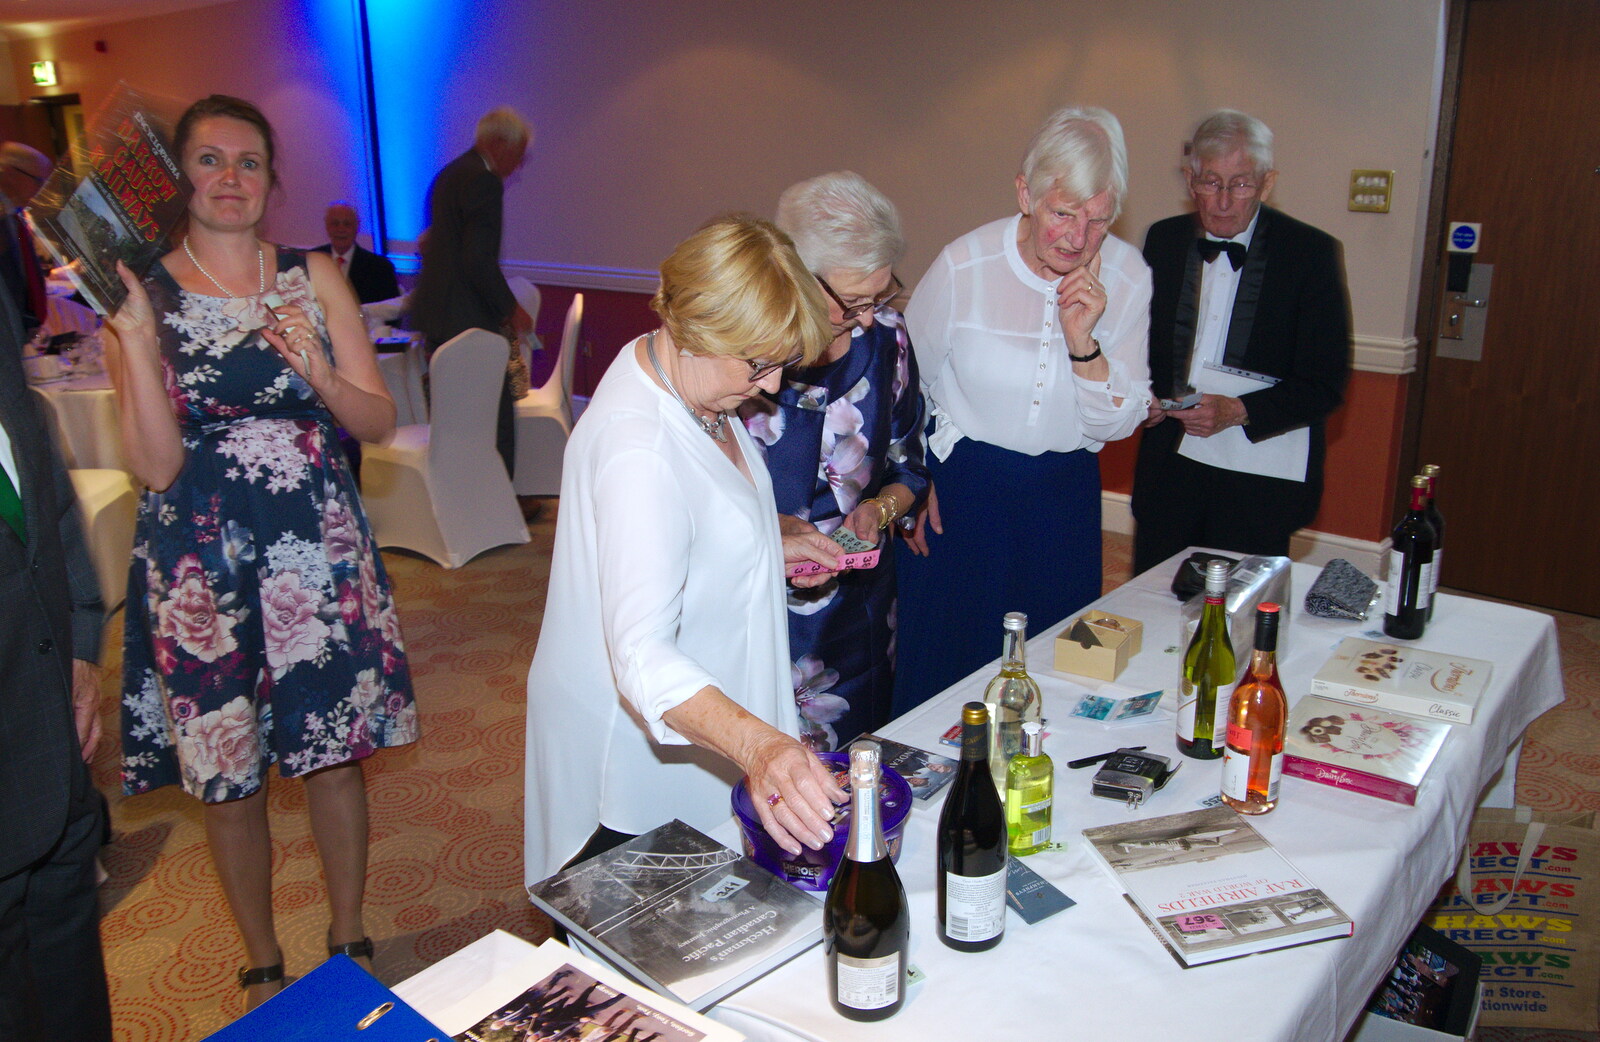 Isobel wins a book about narrow-guage railways from Kenilworth Castle and the 69th Entry Reunion Dinner, Stratford, Warwickshire - 14th September 2019